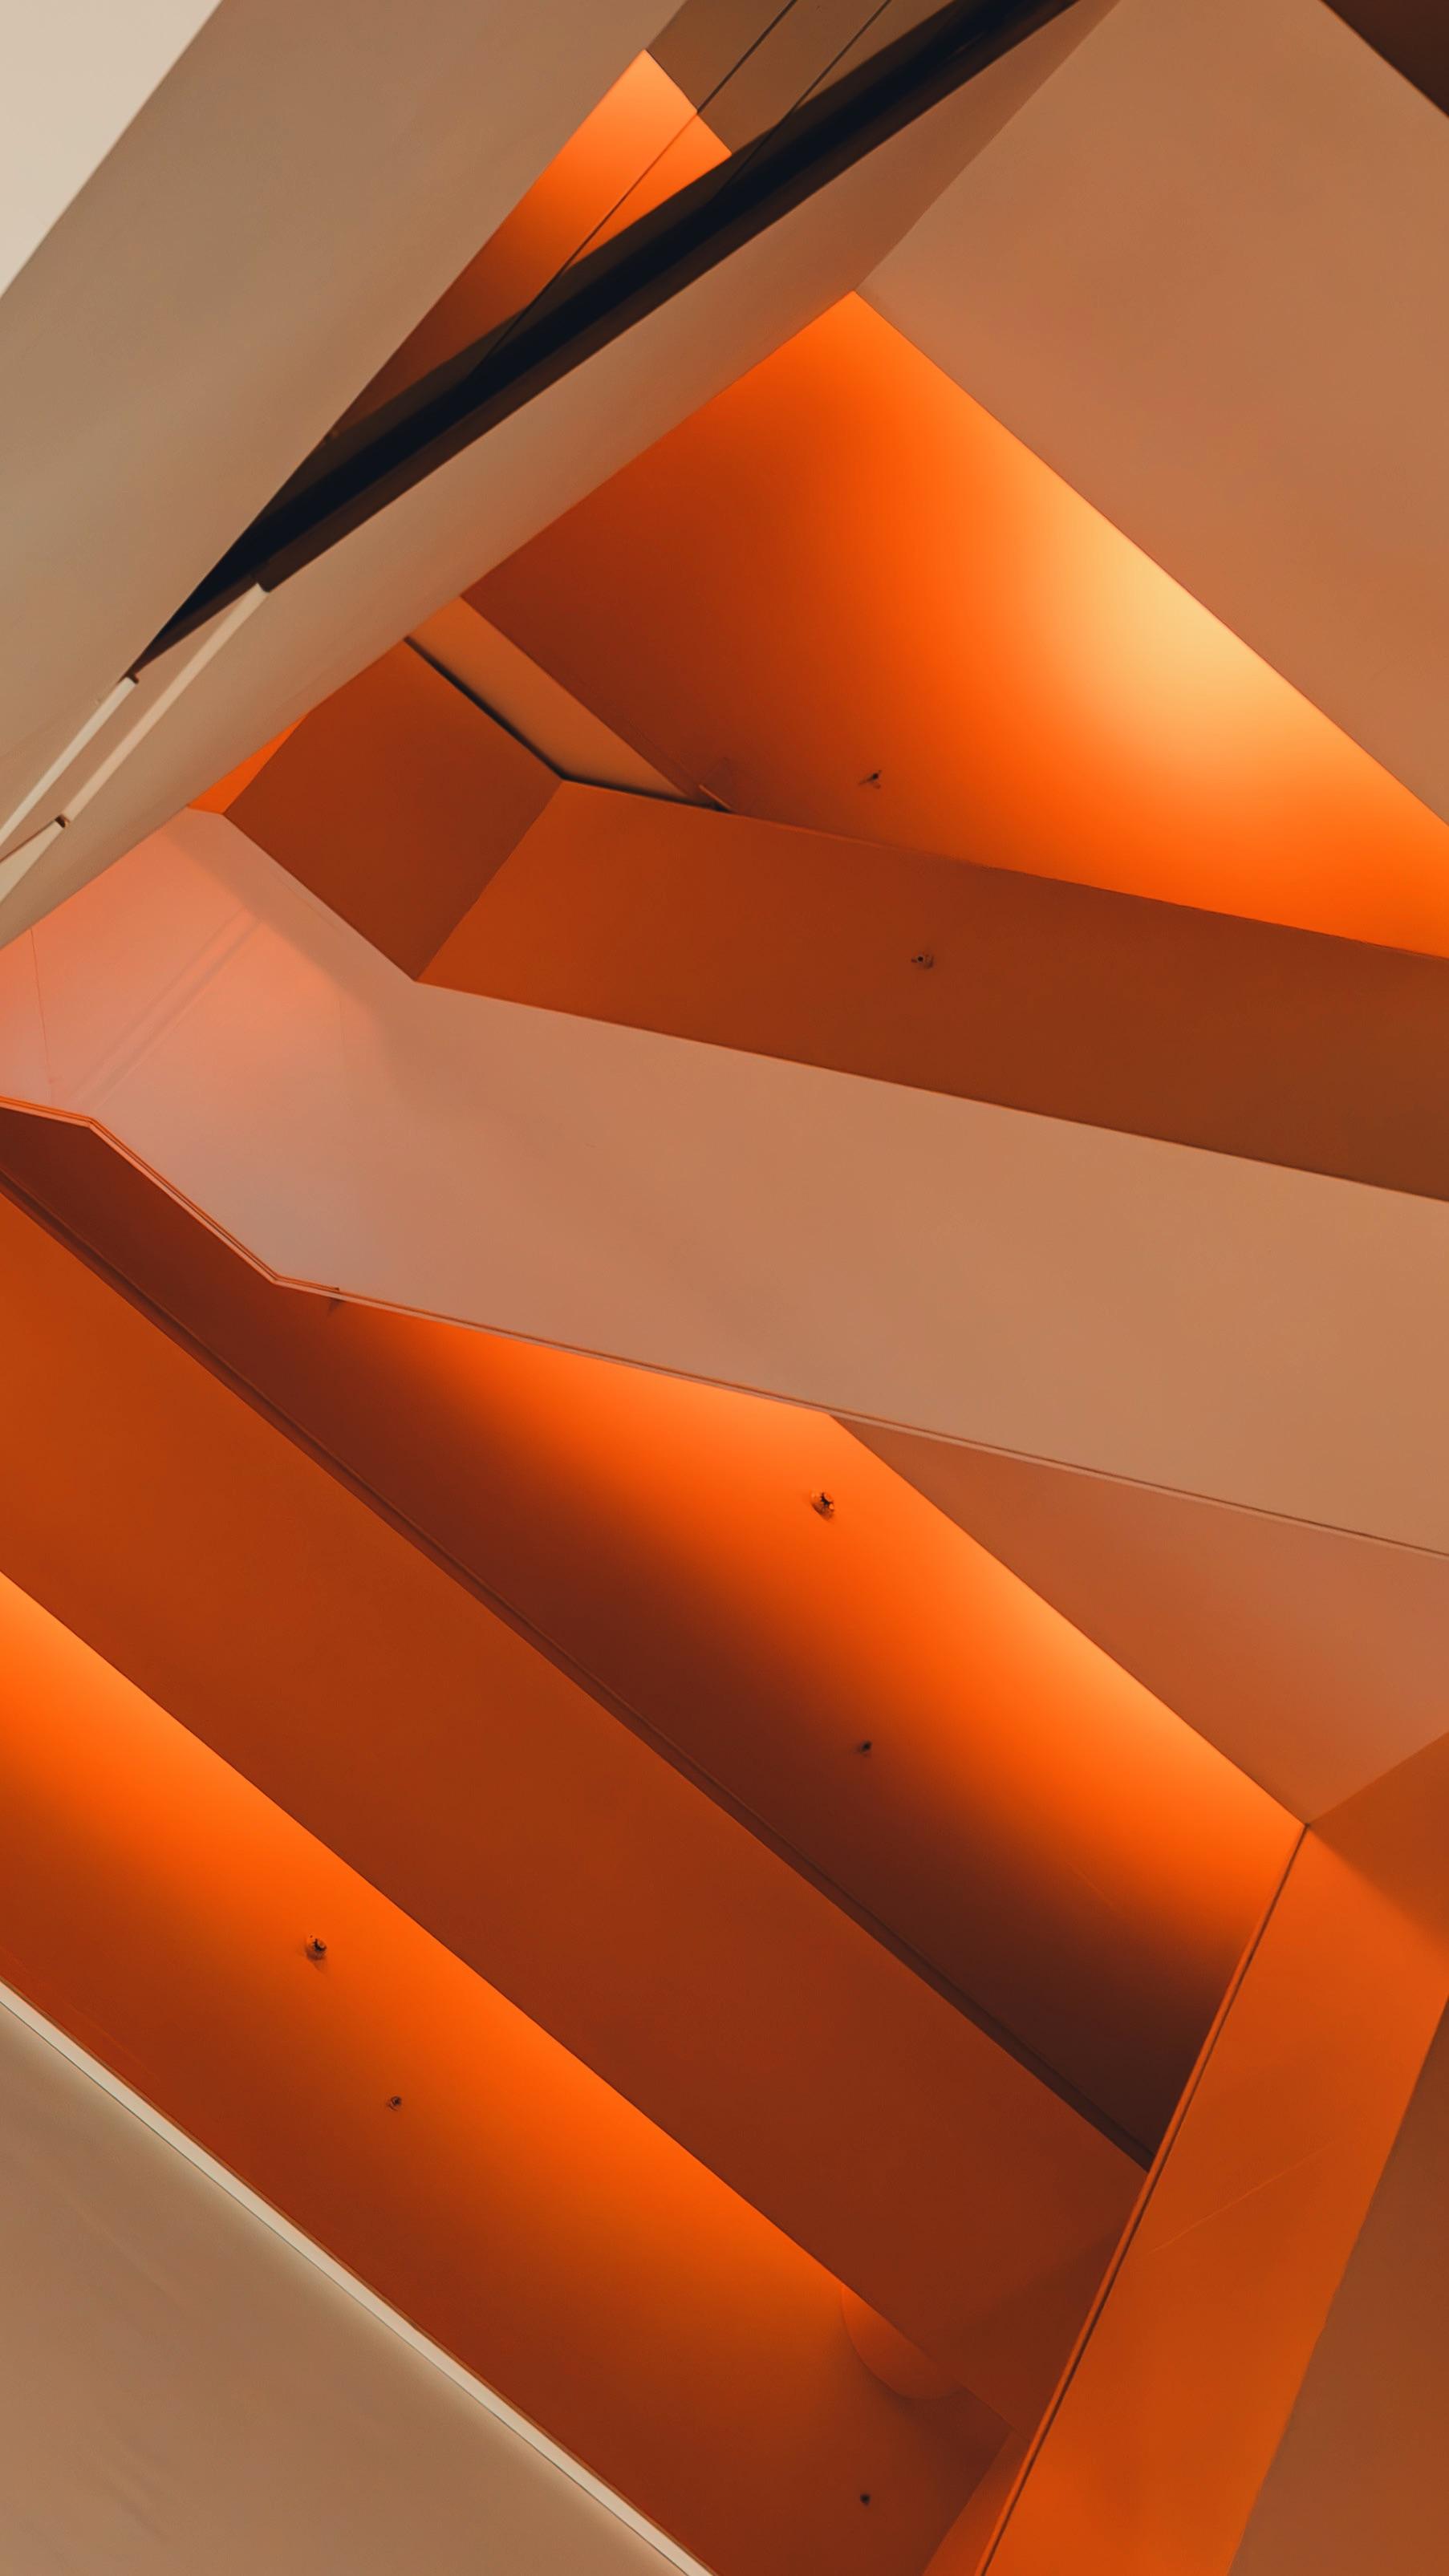 A bright orange staircase with lights on. - Neon orange